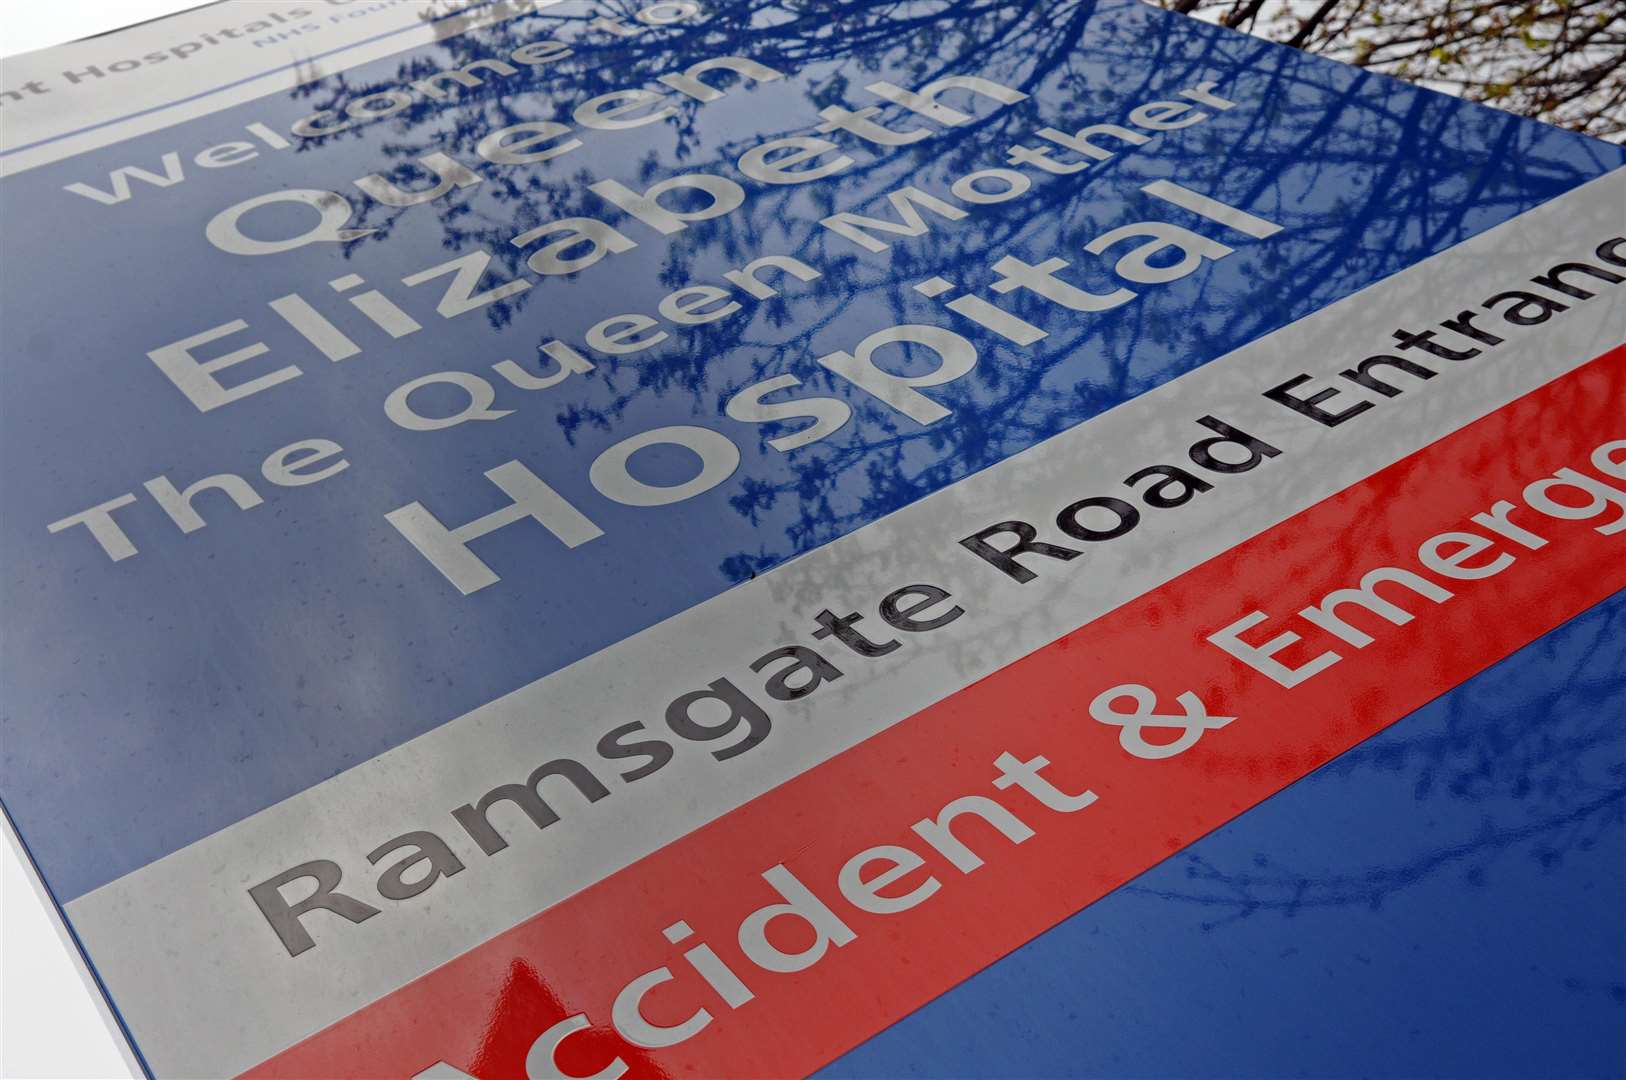 The A&E department was at risk of closure in 2012 but has remained open